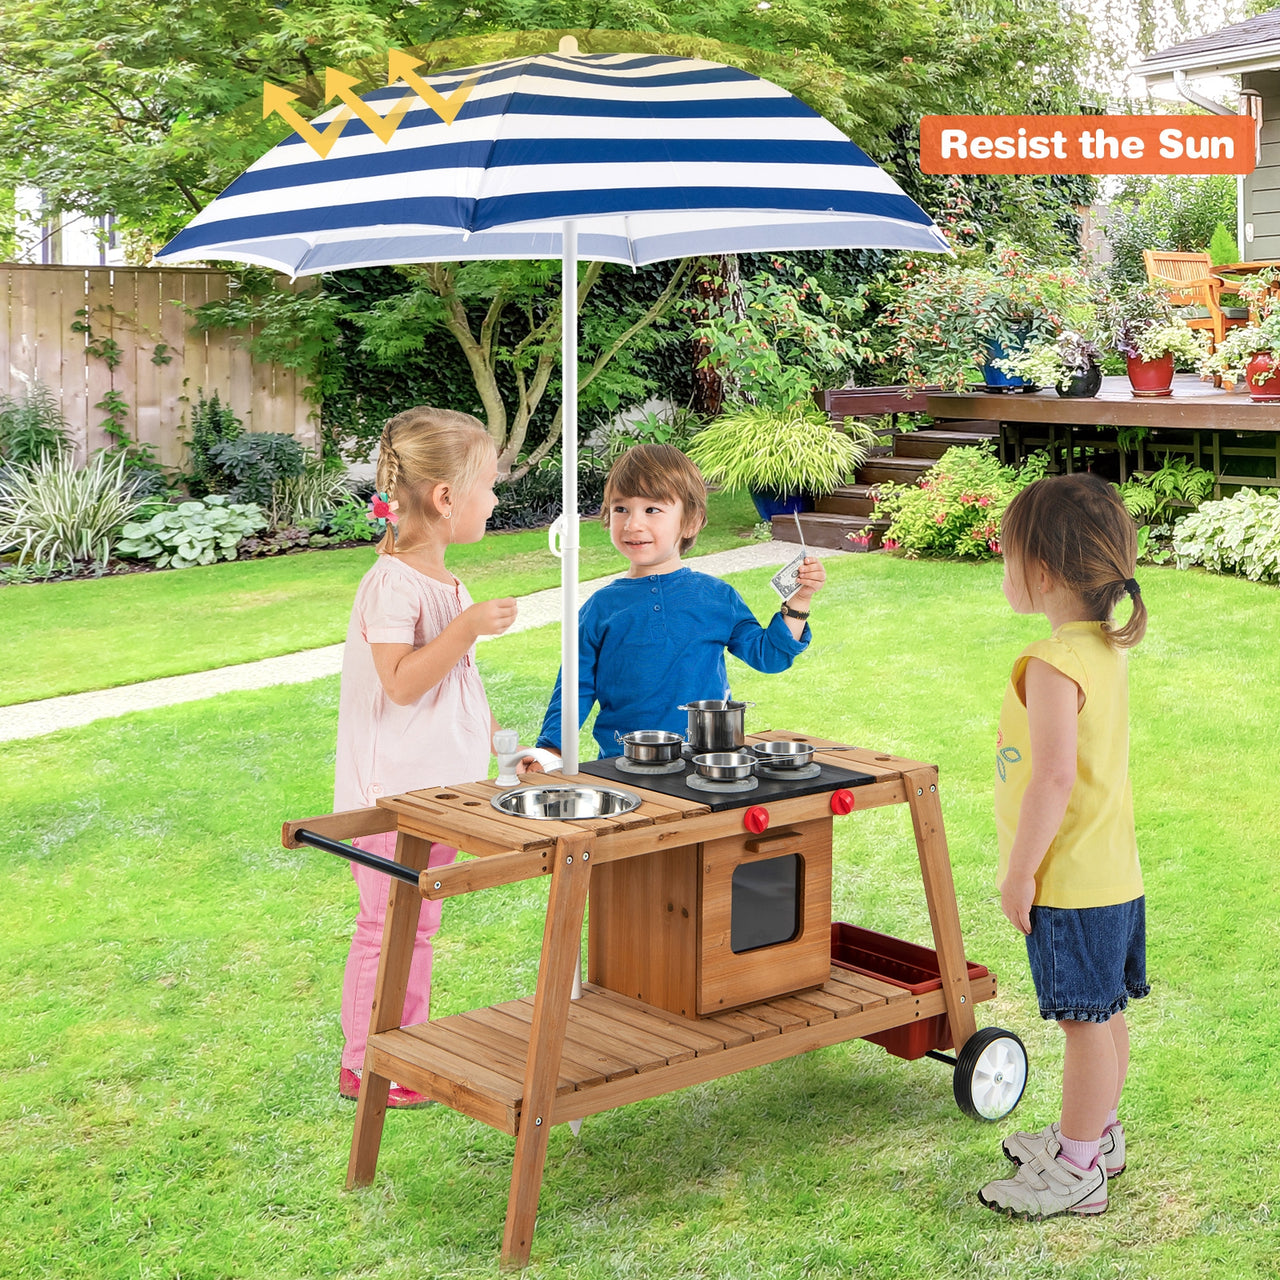 Wooden Play Cart with Sun Proof Umbrella for Toddlers Over 3 Years Old - Gallery View 2 of 10